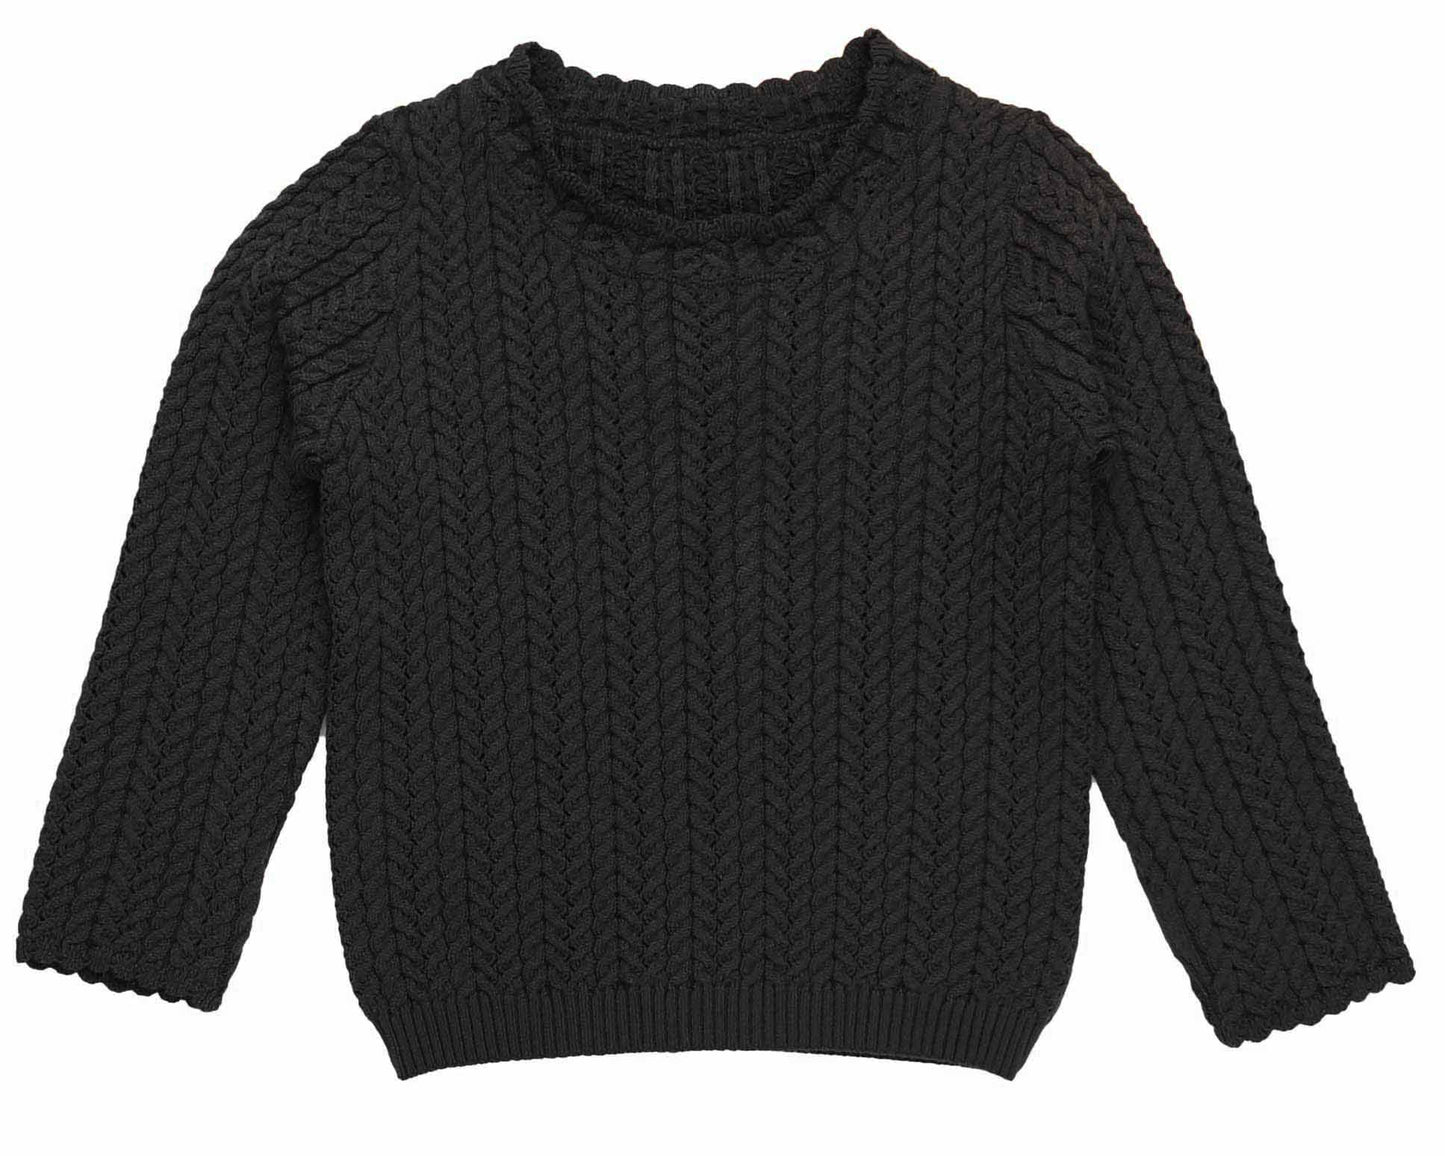 Noma Black Cable Pointelle Knit Sweater [Final Sale]